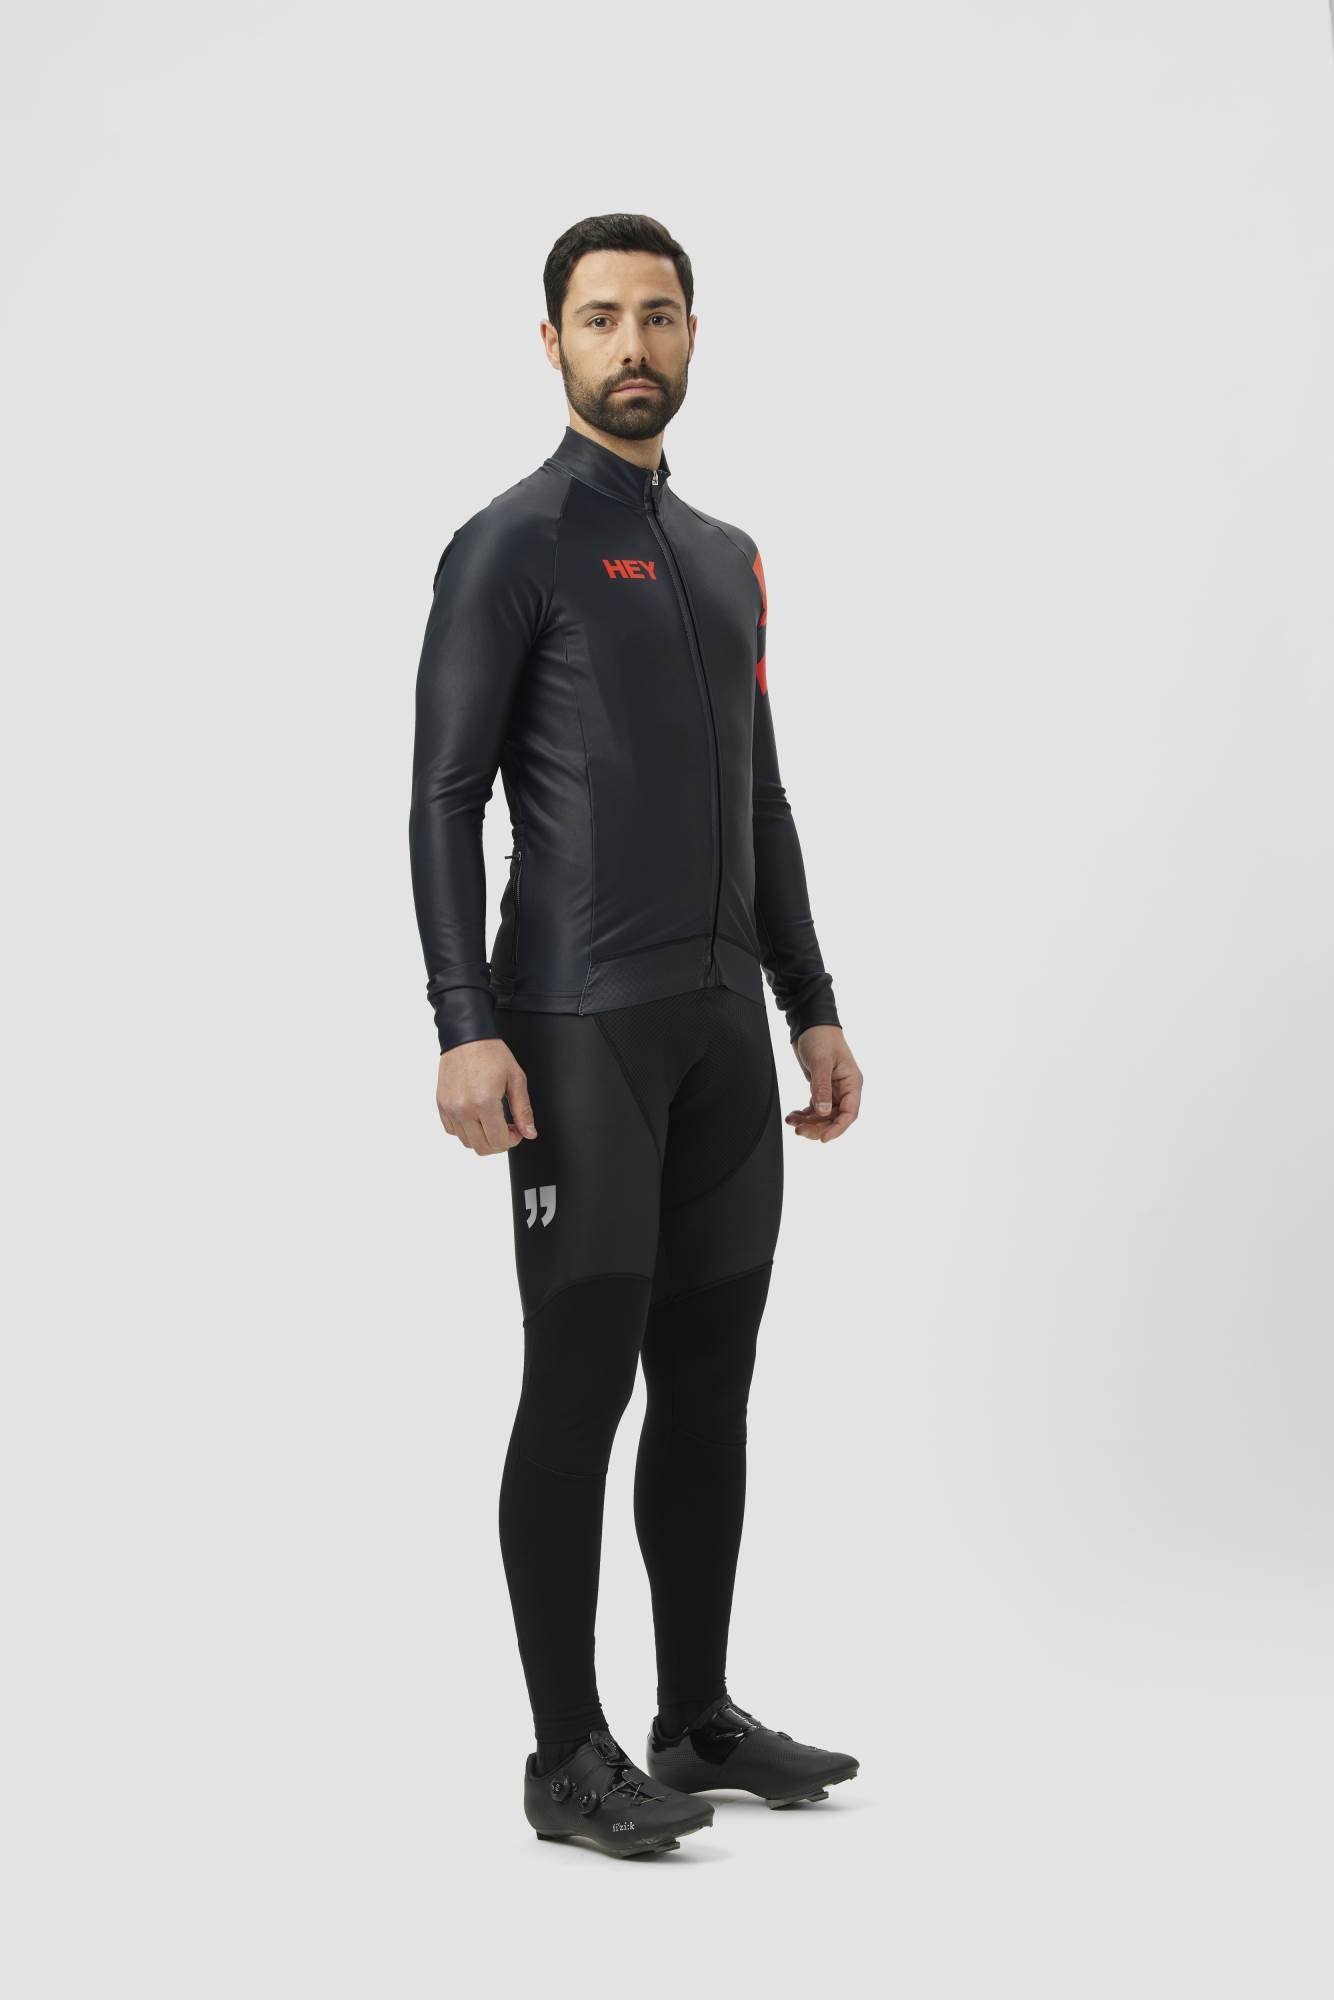 CANYON THERMAL JERSEY